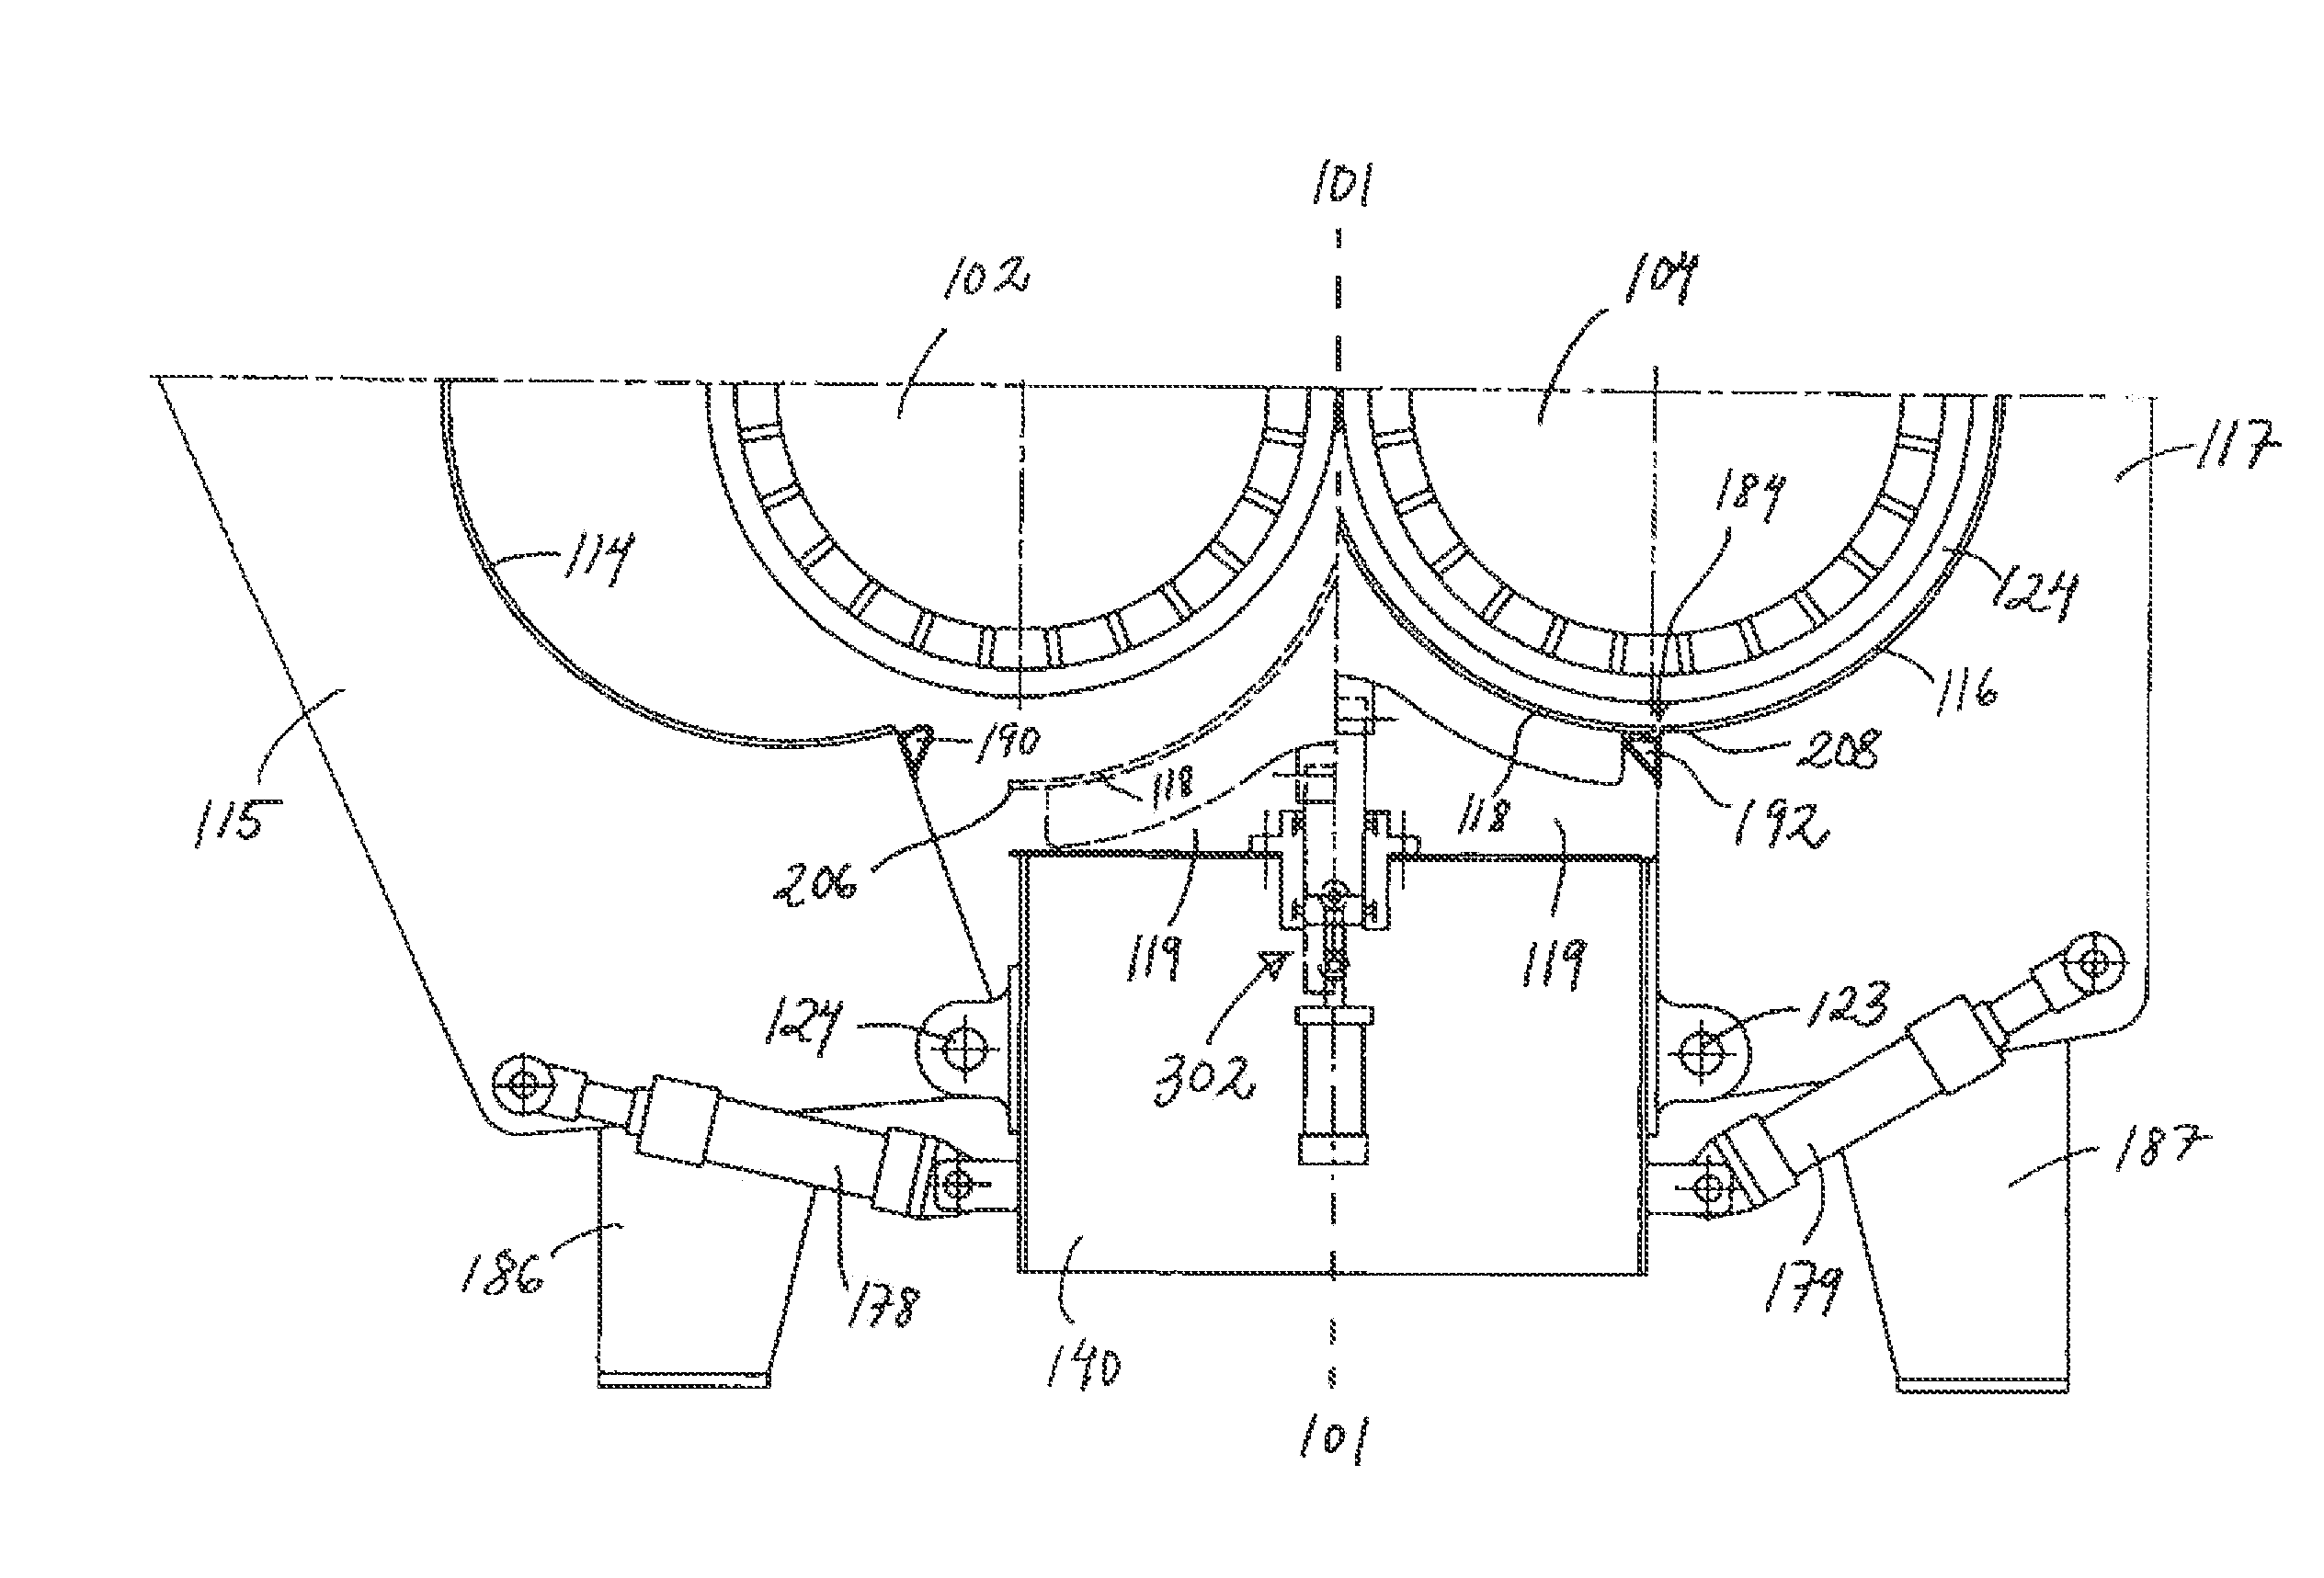 Apparatus for washing and dewatering pulp